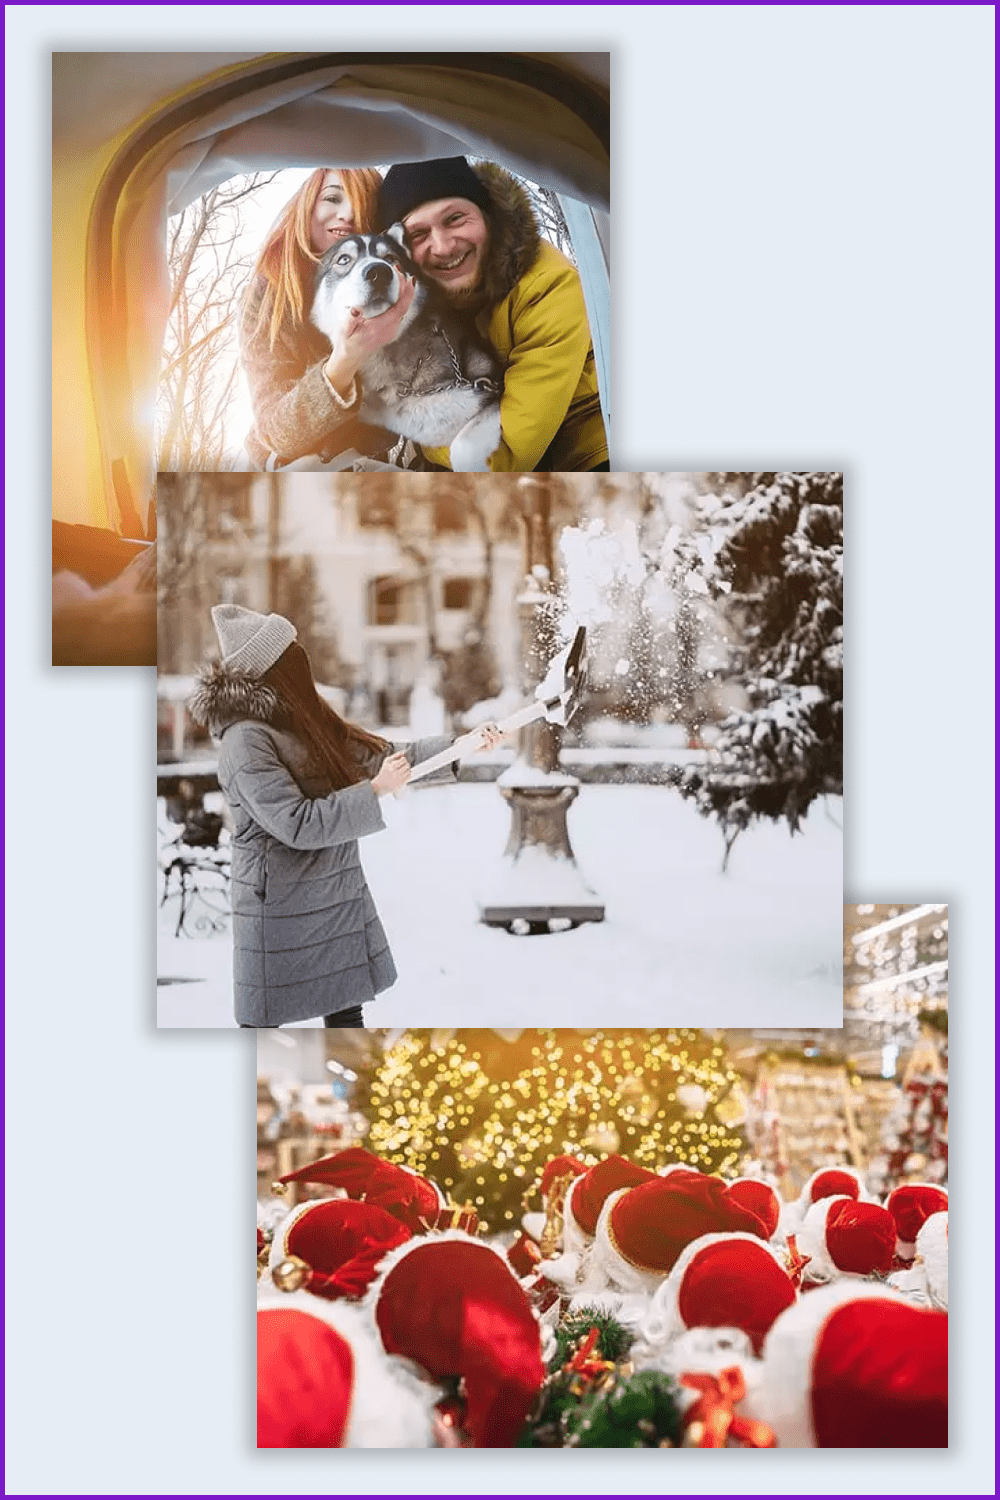 Collage of photos of winter landscapes and Santa Claus.